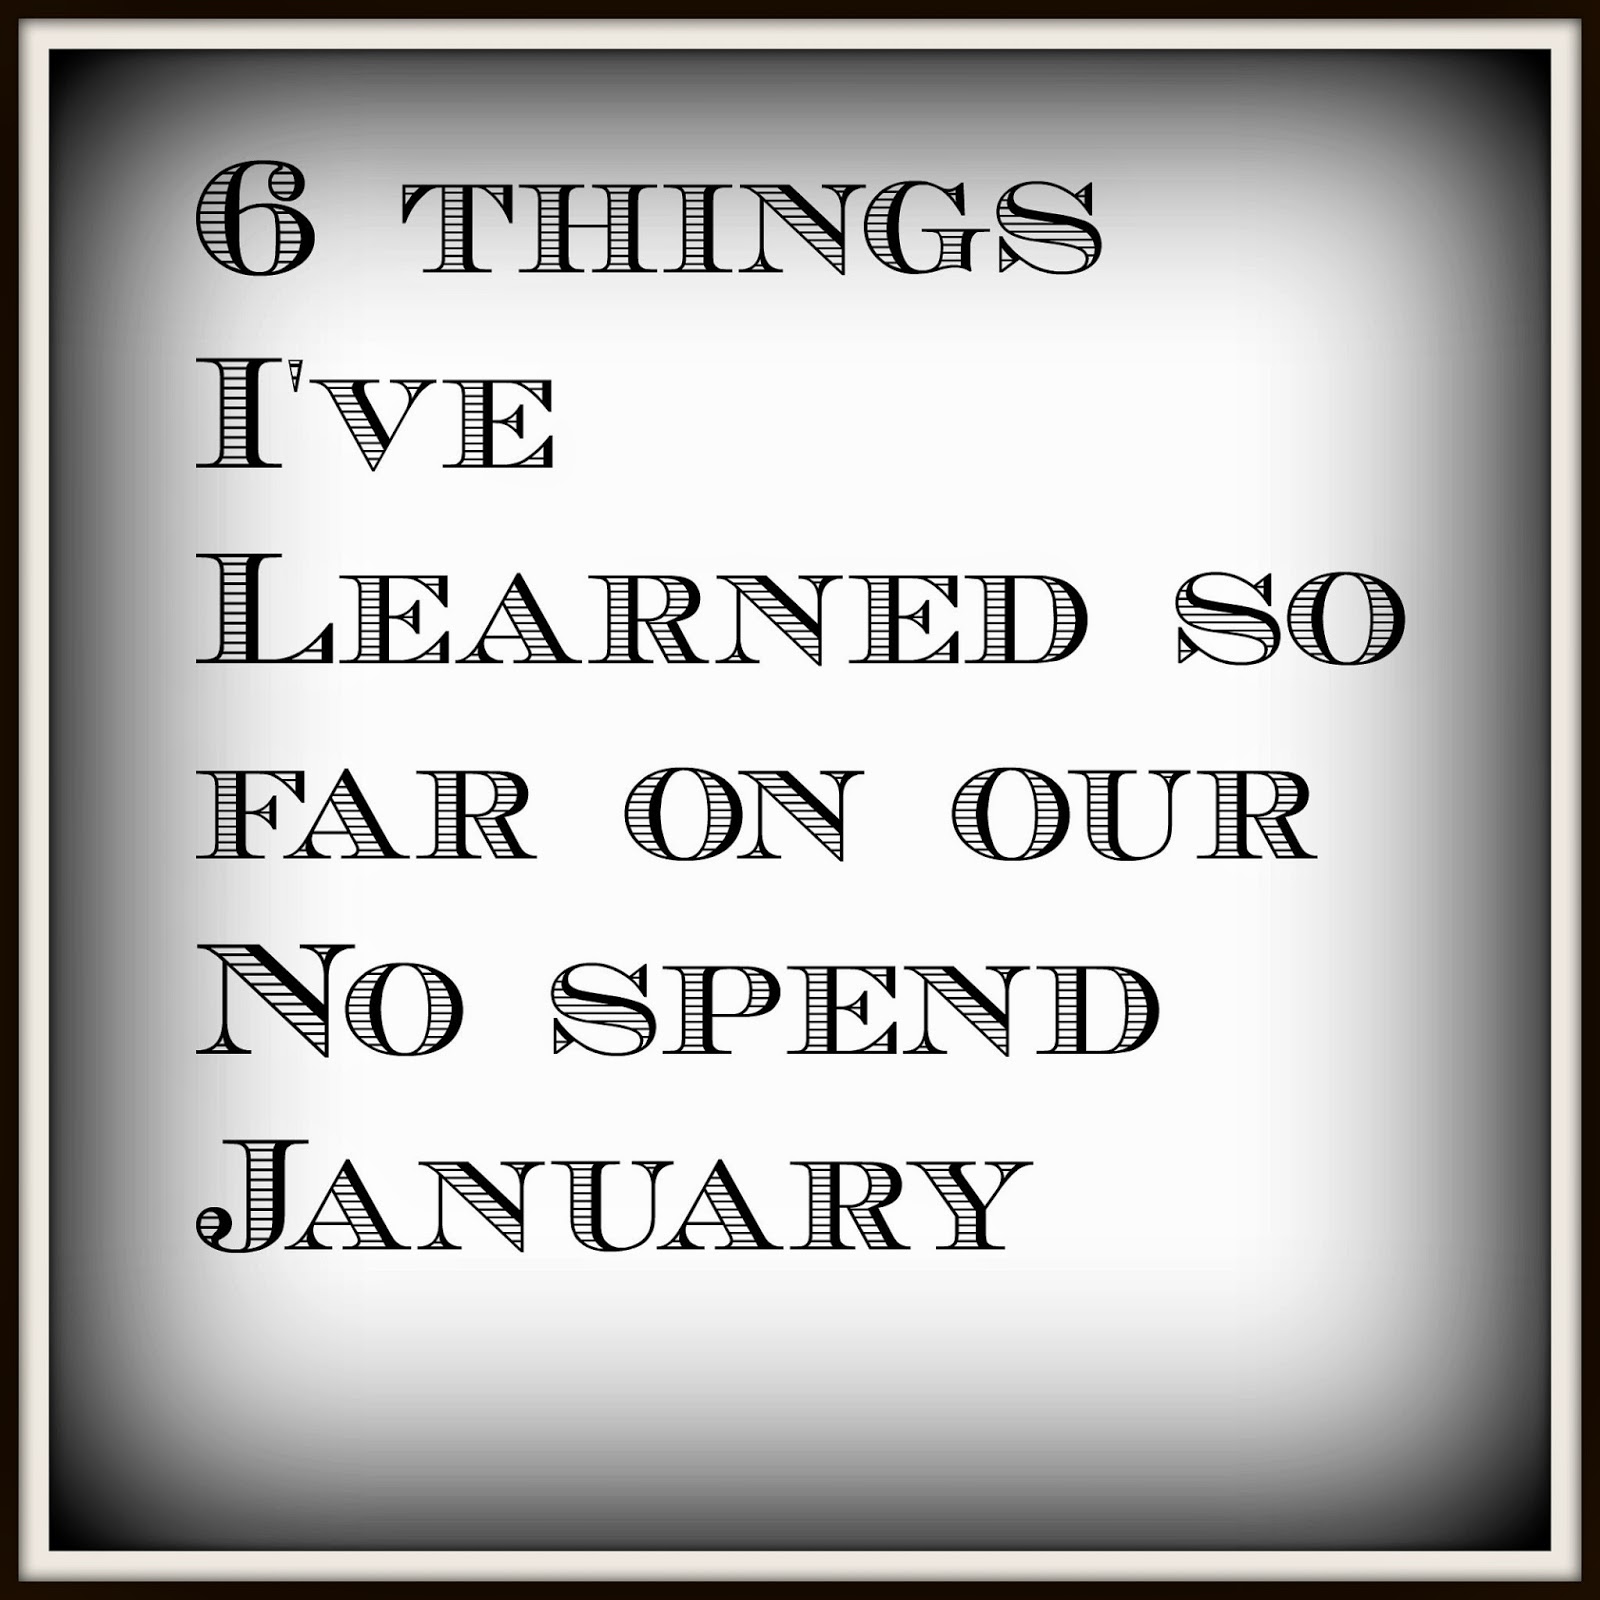 6 Things I've Learned So Far on Our No Spend January